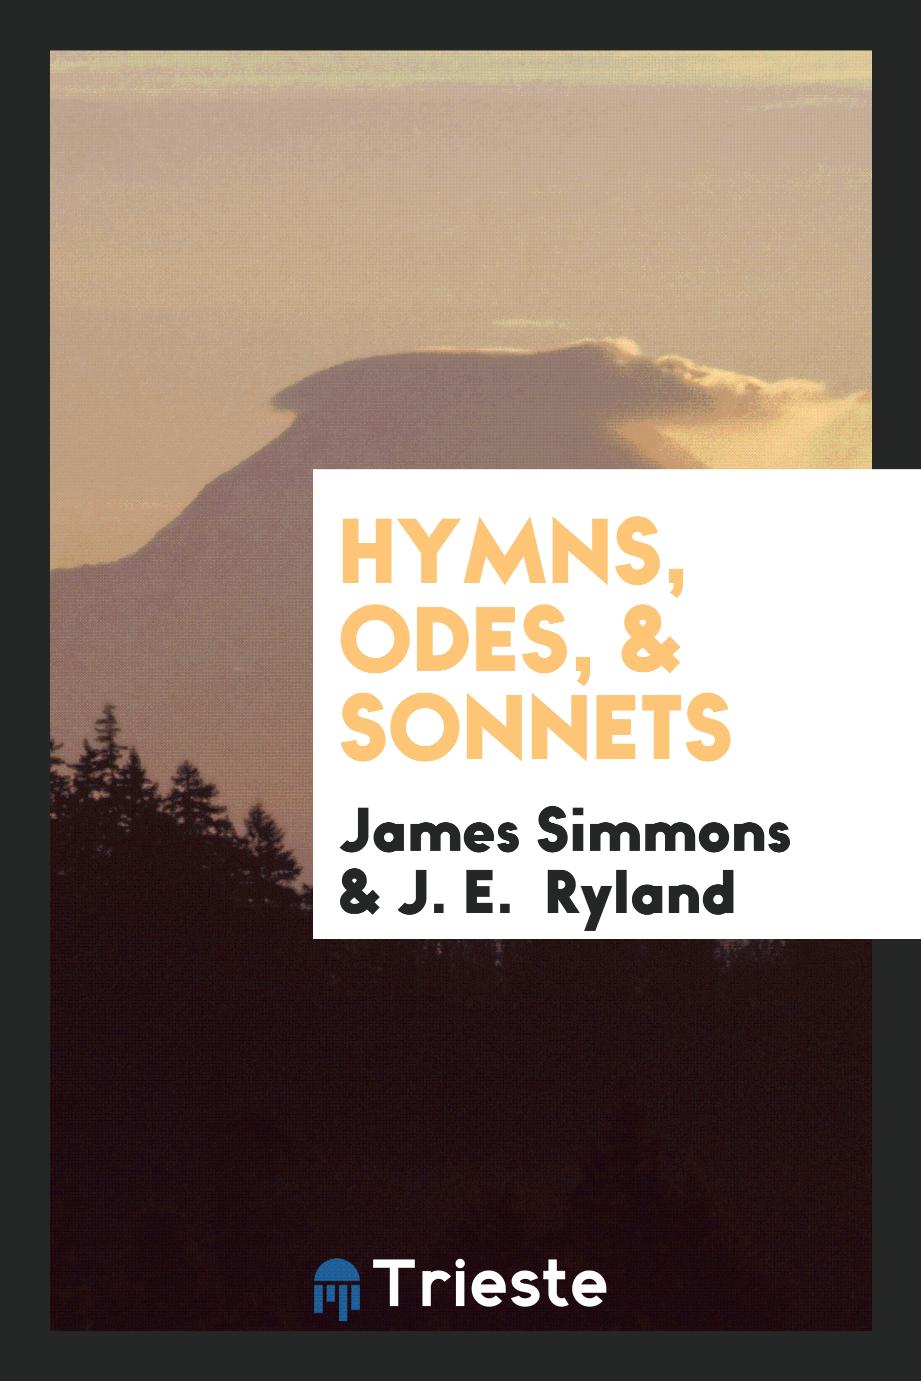 Hymns, Odes, & Sonnets